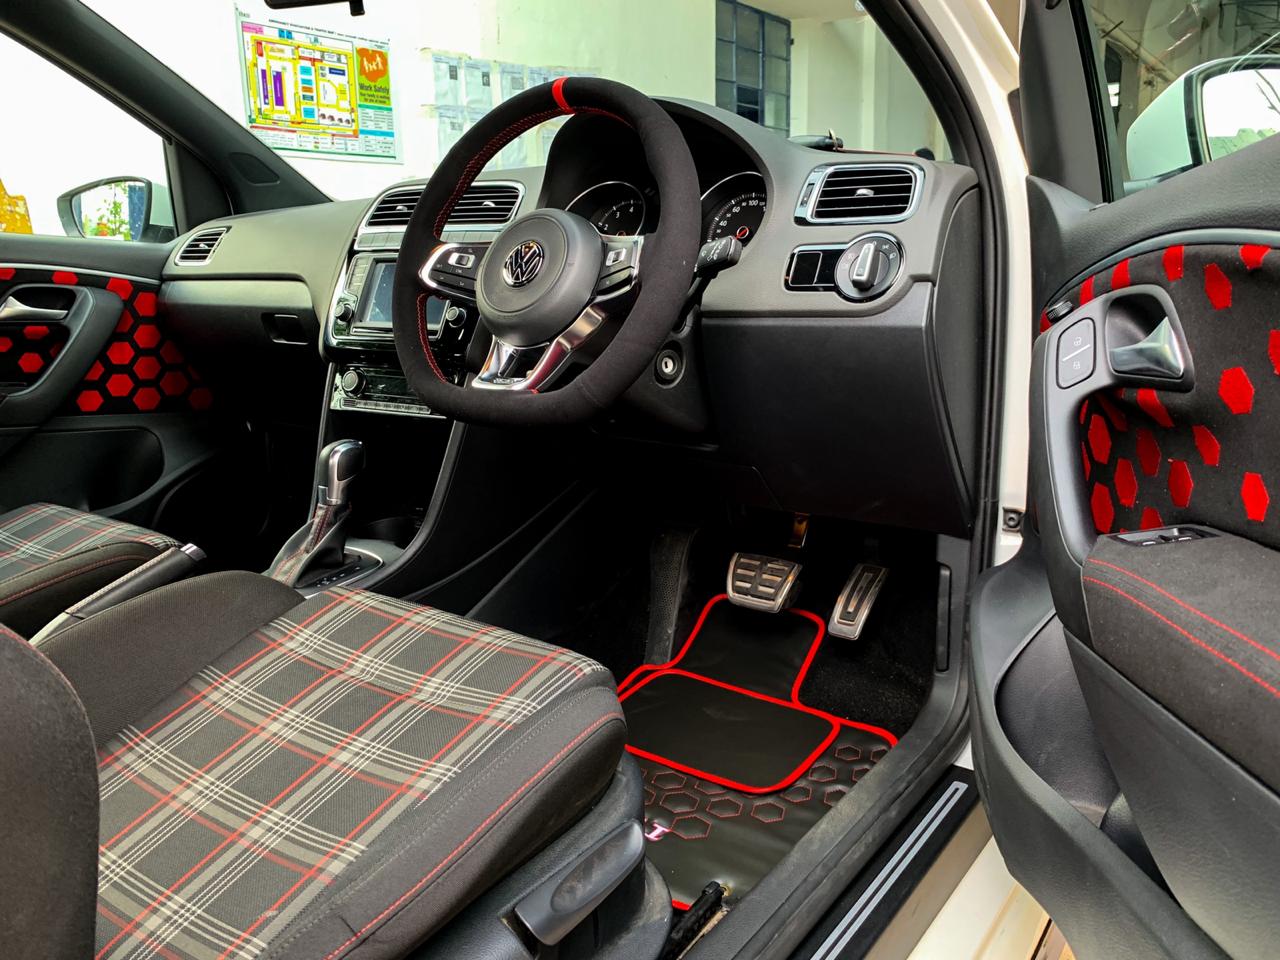 Car Interior modification: Custom Floor Mats, Door Pads, and Steering Cover, installed by CETUS, in a VW Polo GTI
